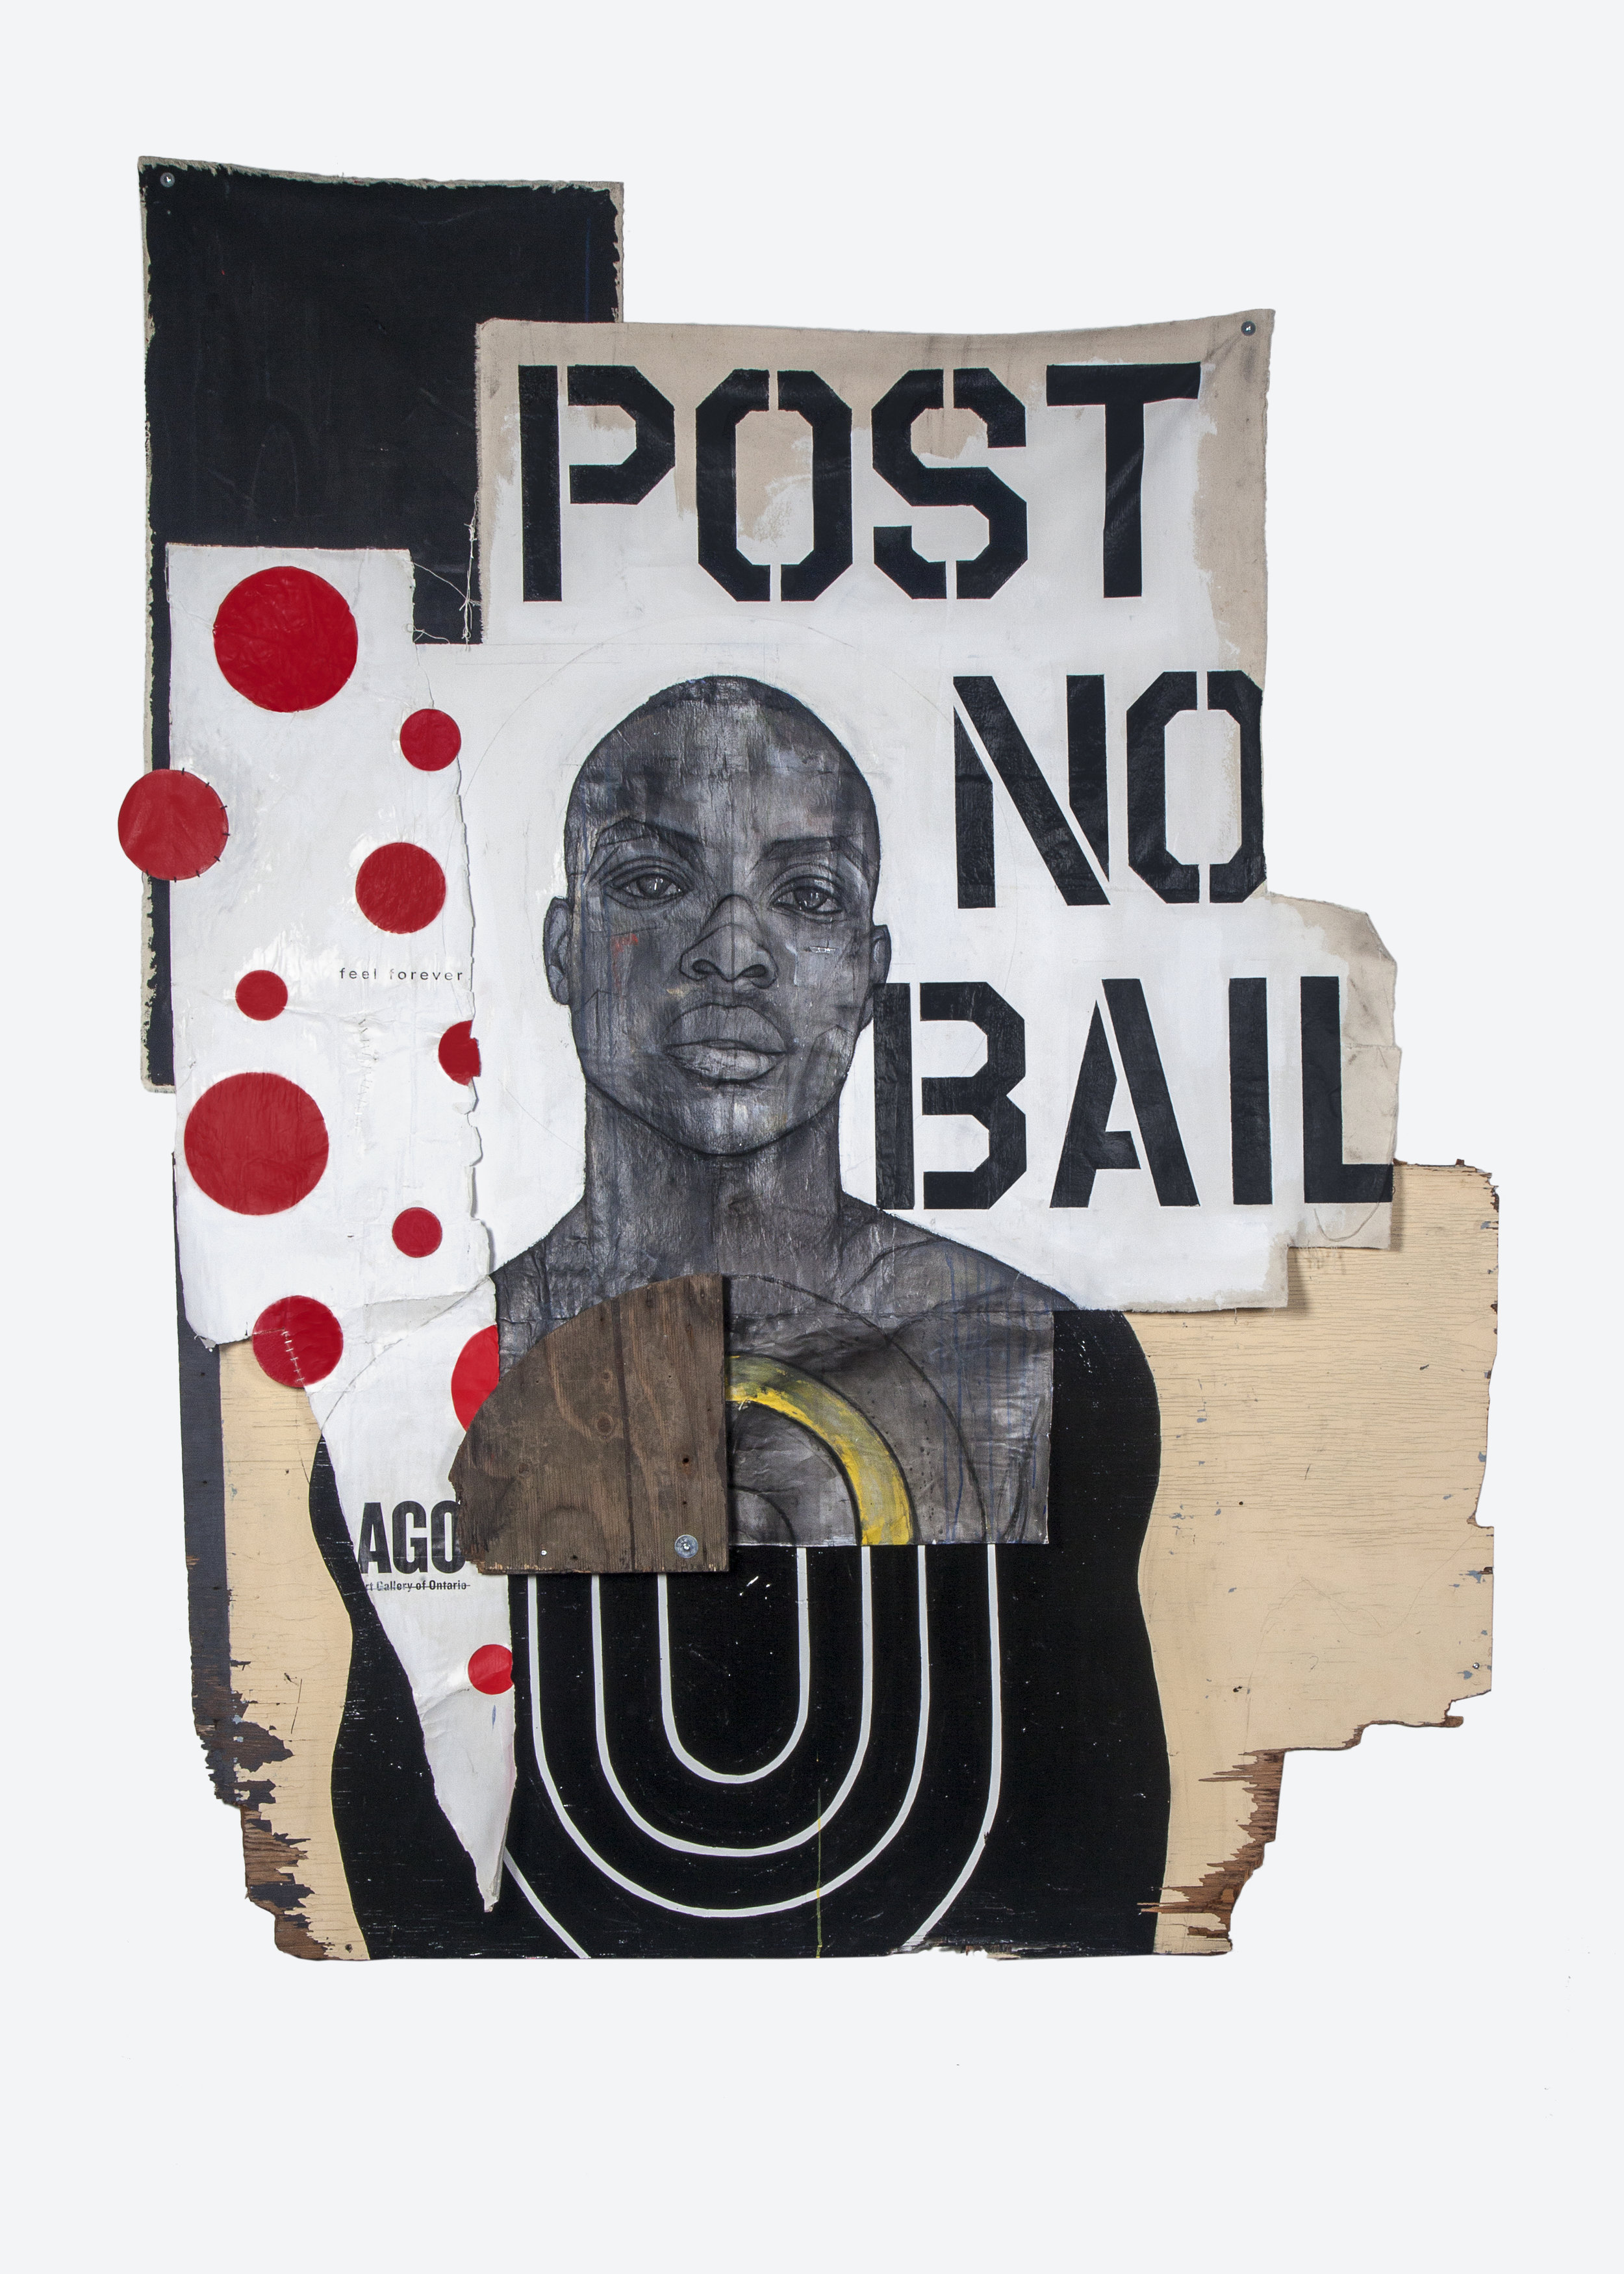  Untitled (Post no bail), 2018                                                                                                                 Acrylic, charcoal, pastel, billboard poster and reclaimed wood                                             